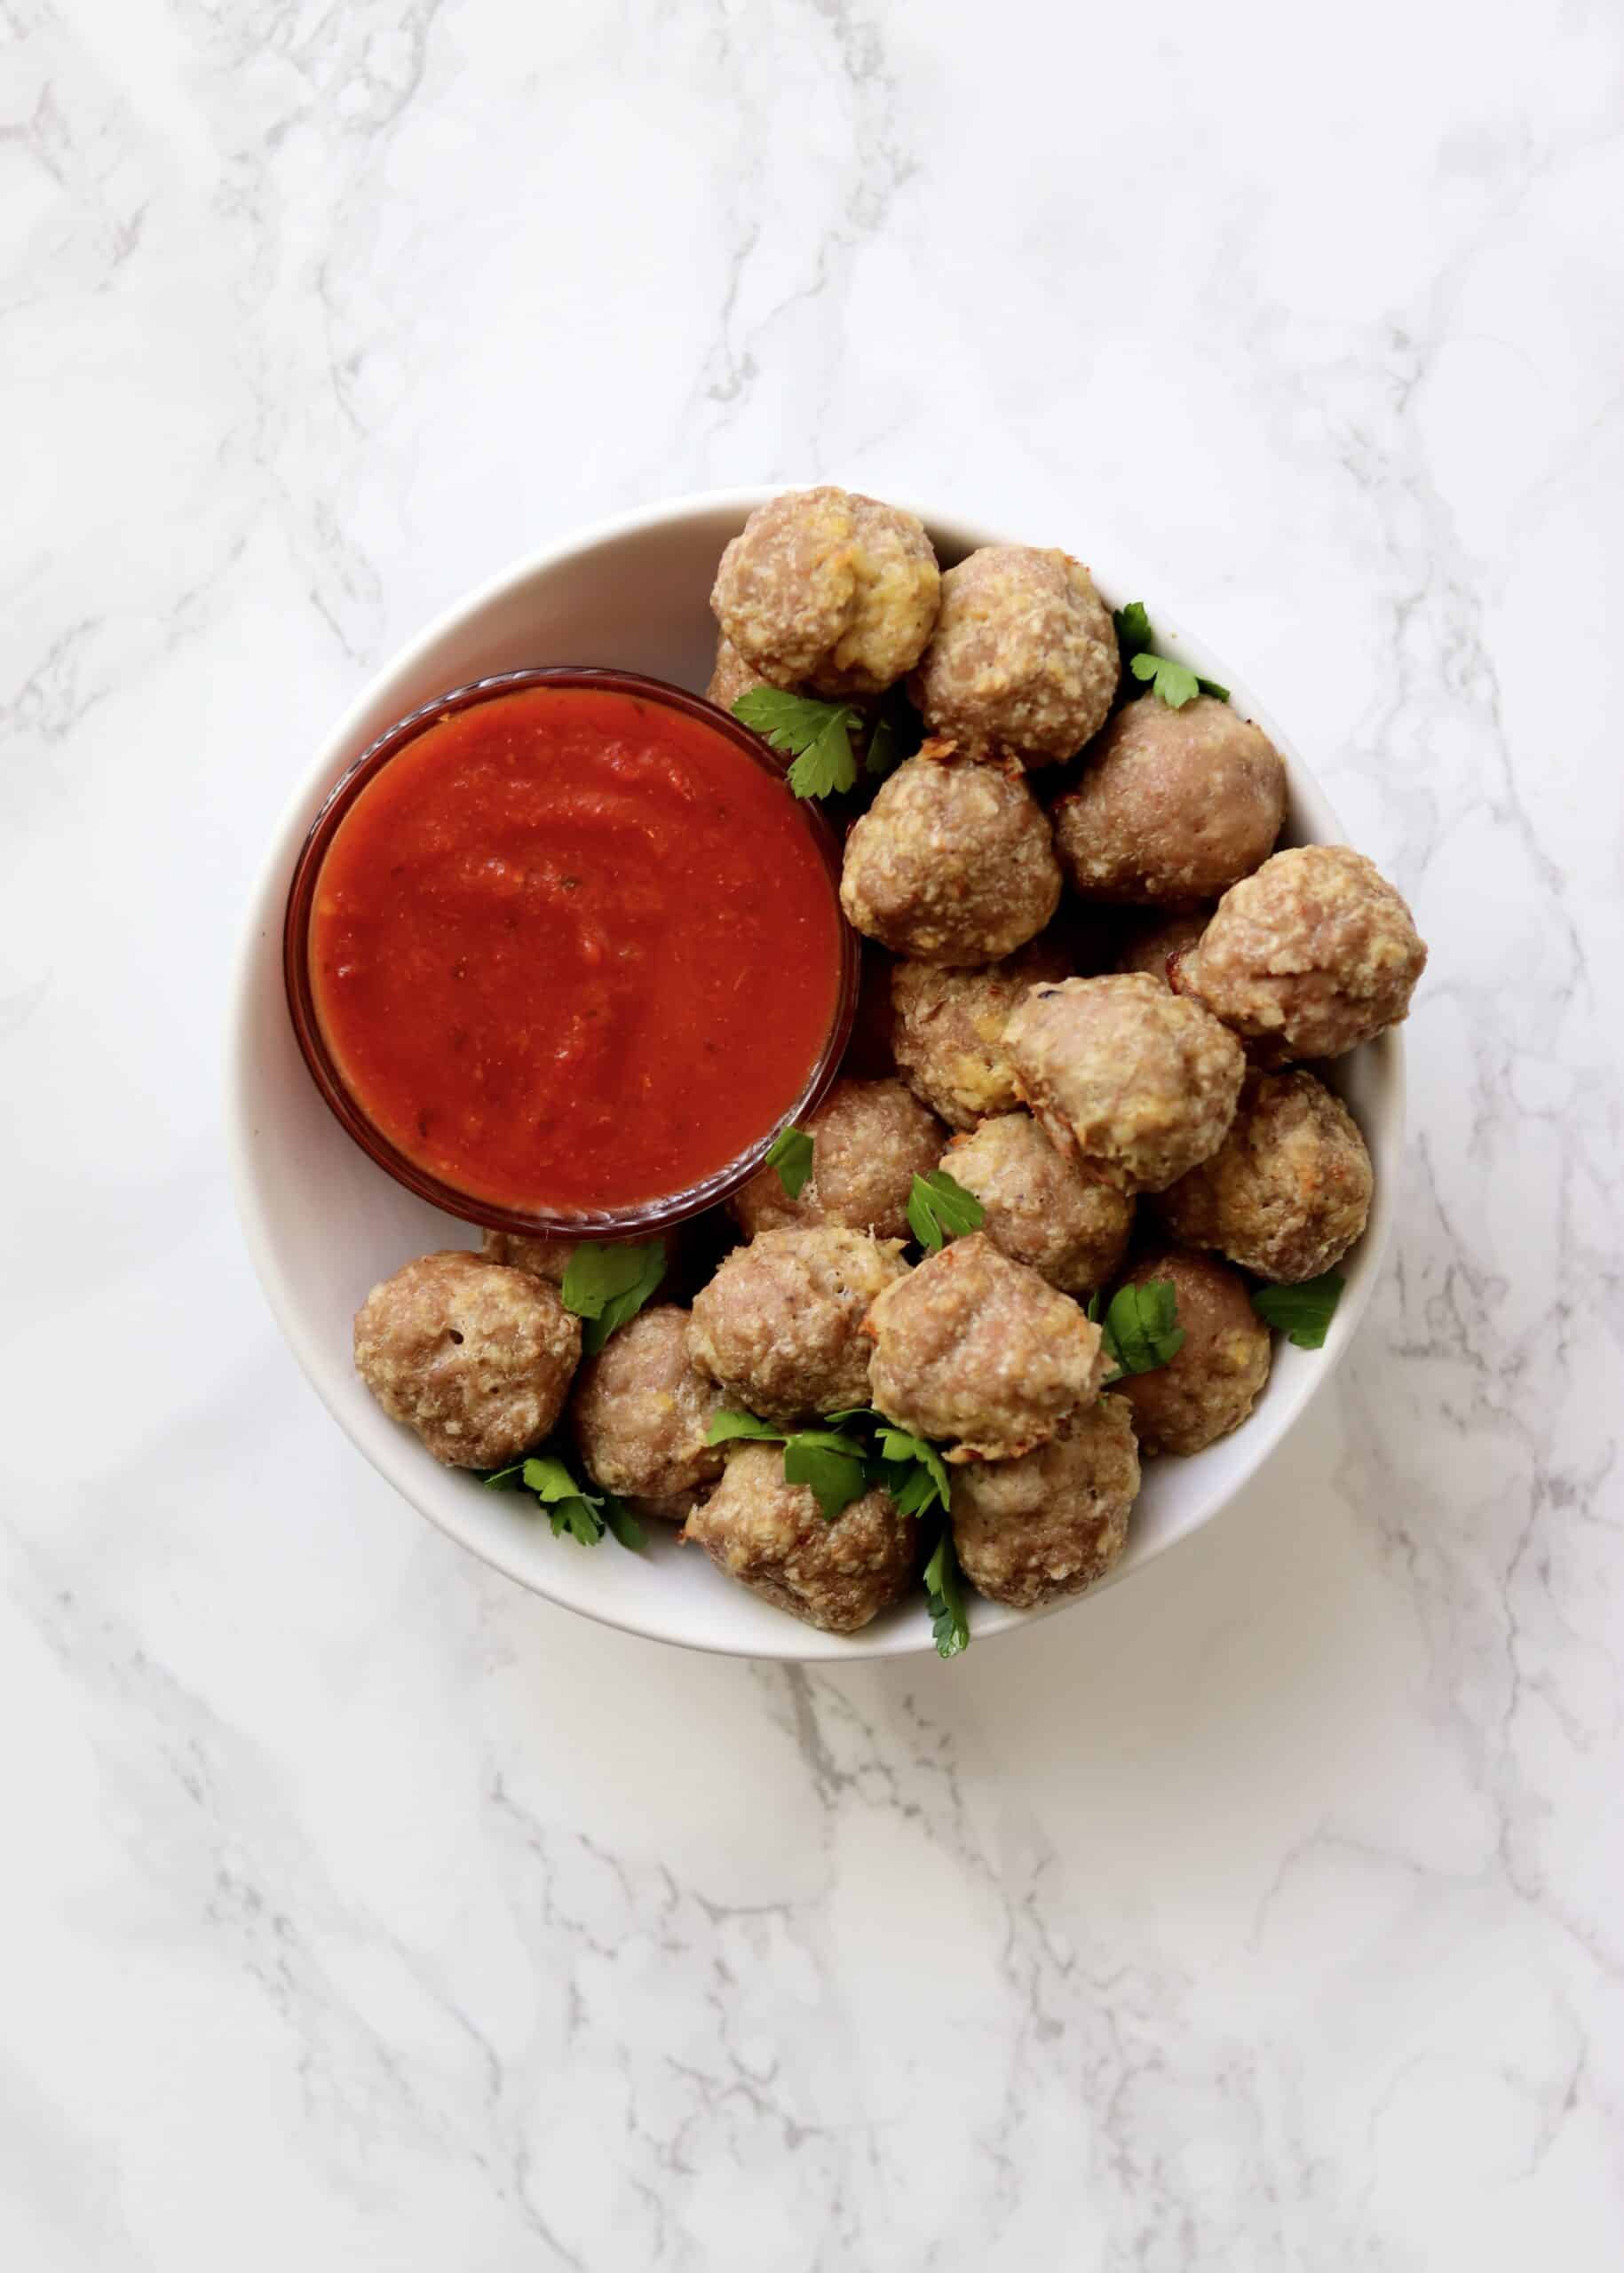 Baked Turkey Meatballs are healthy and require just a few simple ingredients. Just mix them up, roll, and bake! They're versatile and freezer friendly! You can freeze them before or after baking.